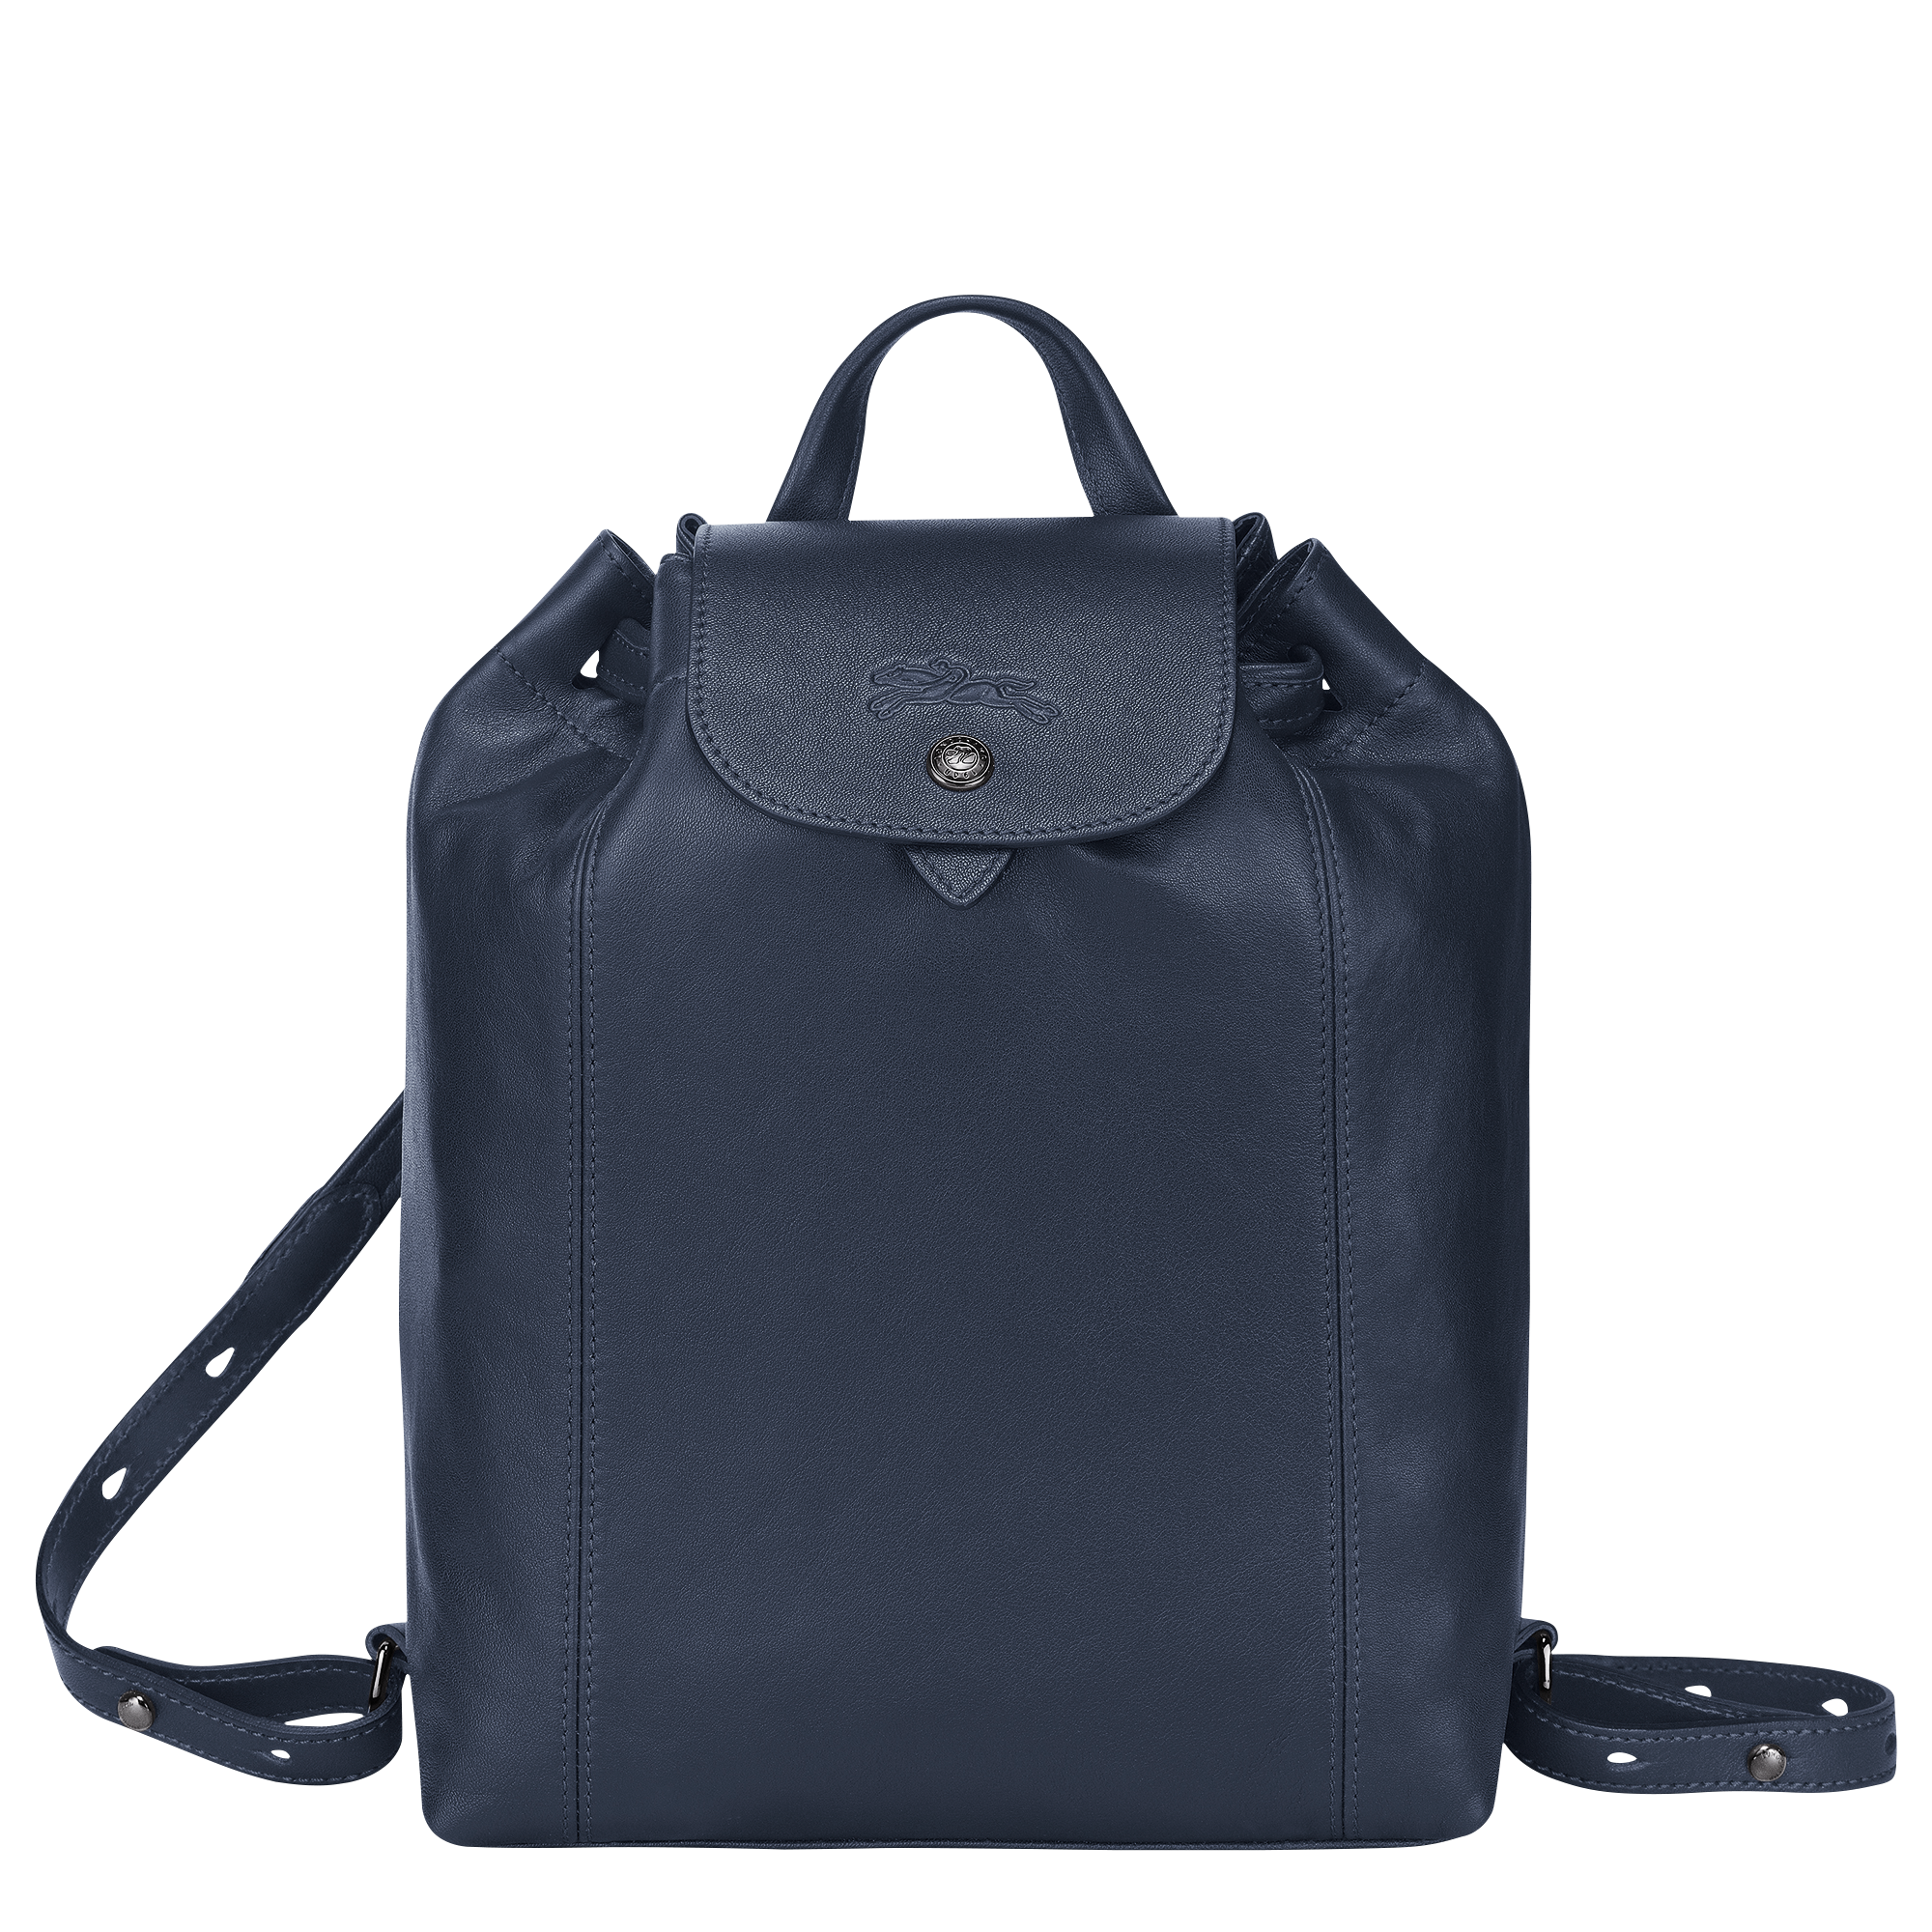 Backpack Le Pliage Cuir Navy 